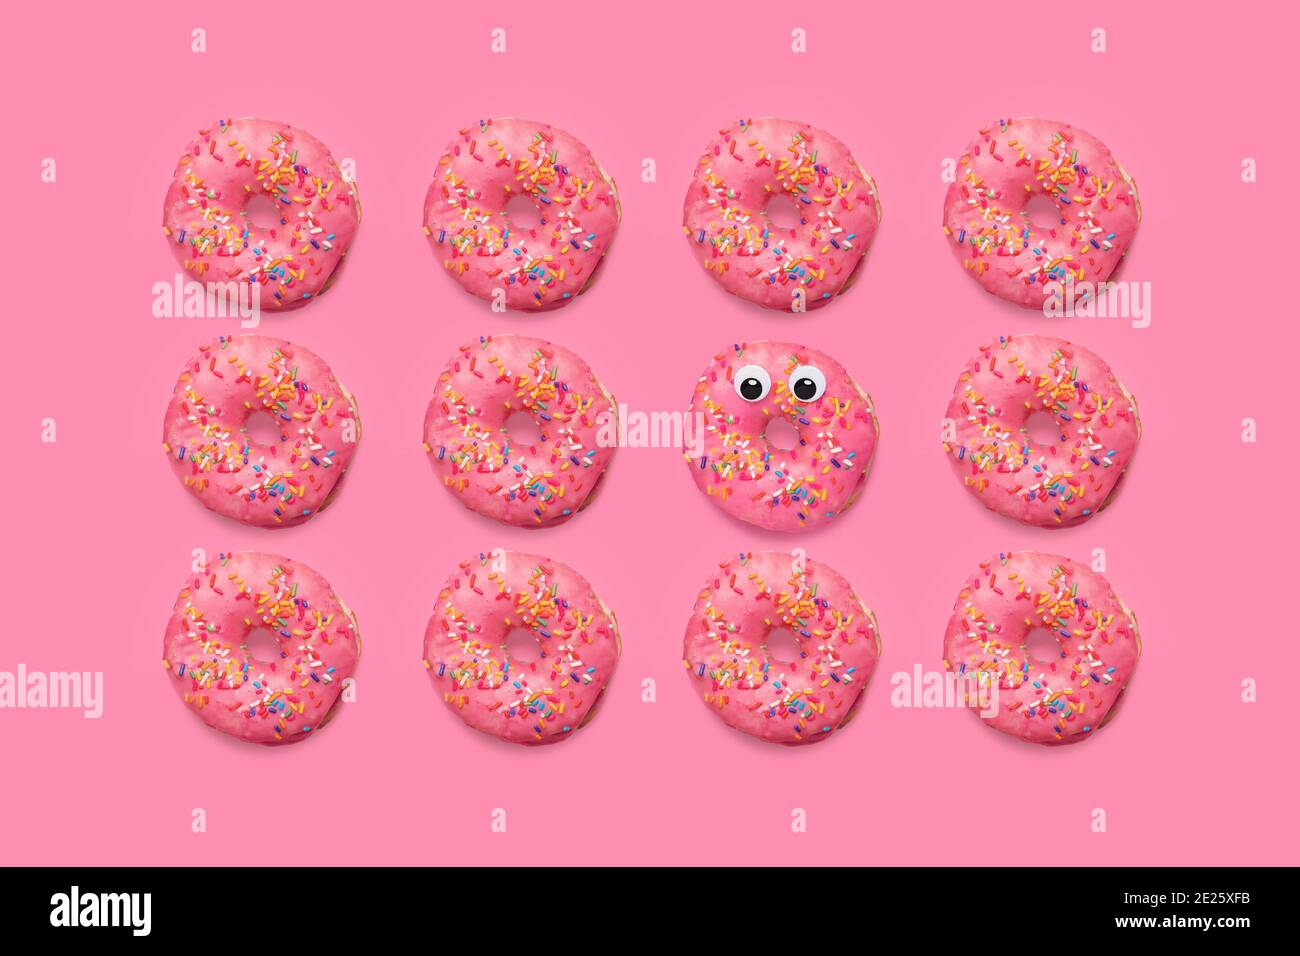 Pink donuts doughnuts with sprinkles on a matching pink background with one doughnut with googly eyes Stock Photo